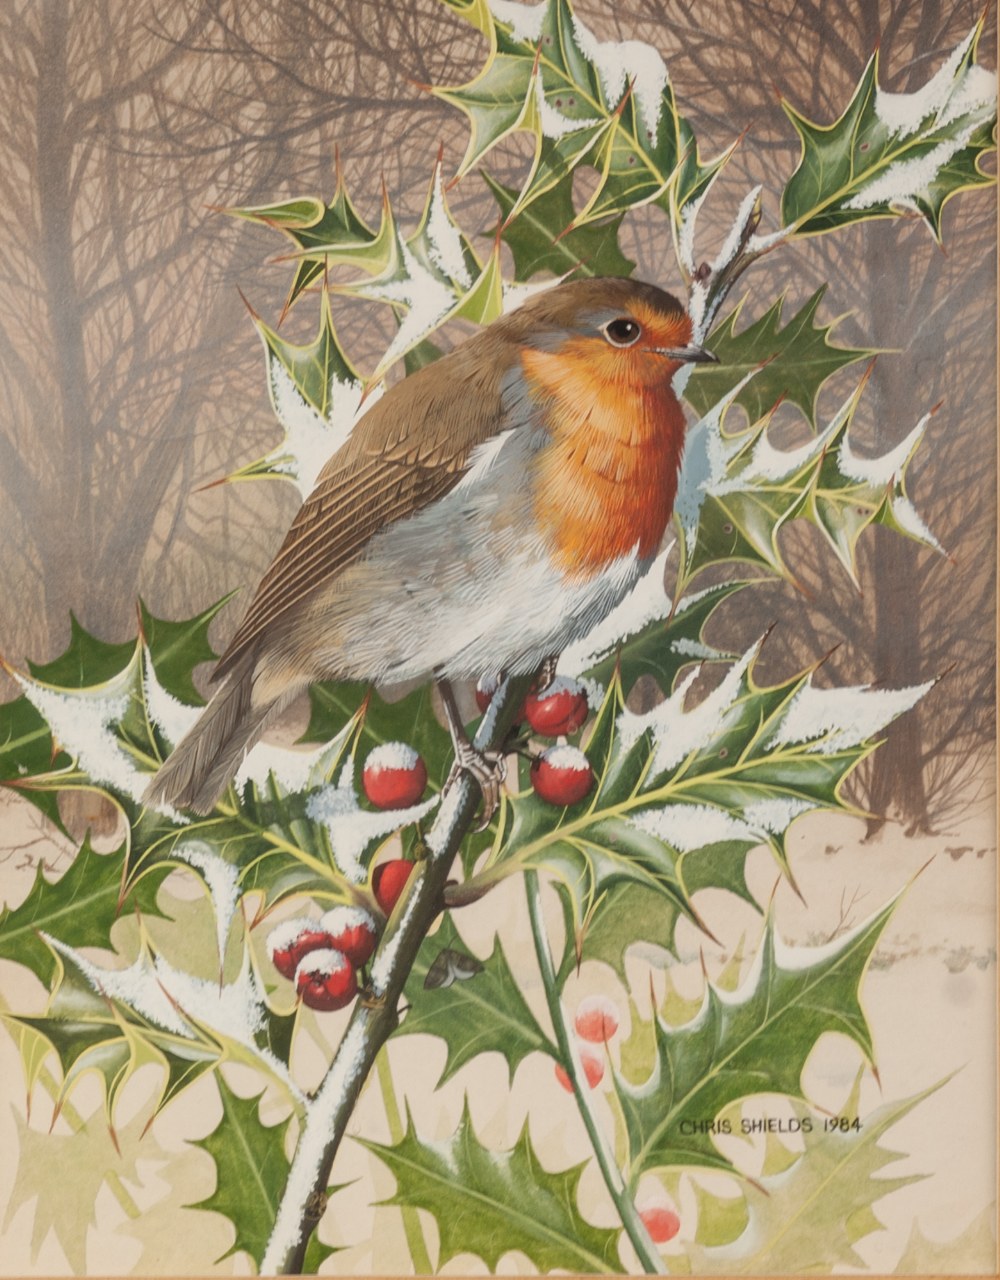 CHRIS SHIELDS (Contemporary) WATERCOLOUR 'Robin on a holly branch' Signed and dated 1984 8 1/4" x